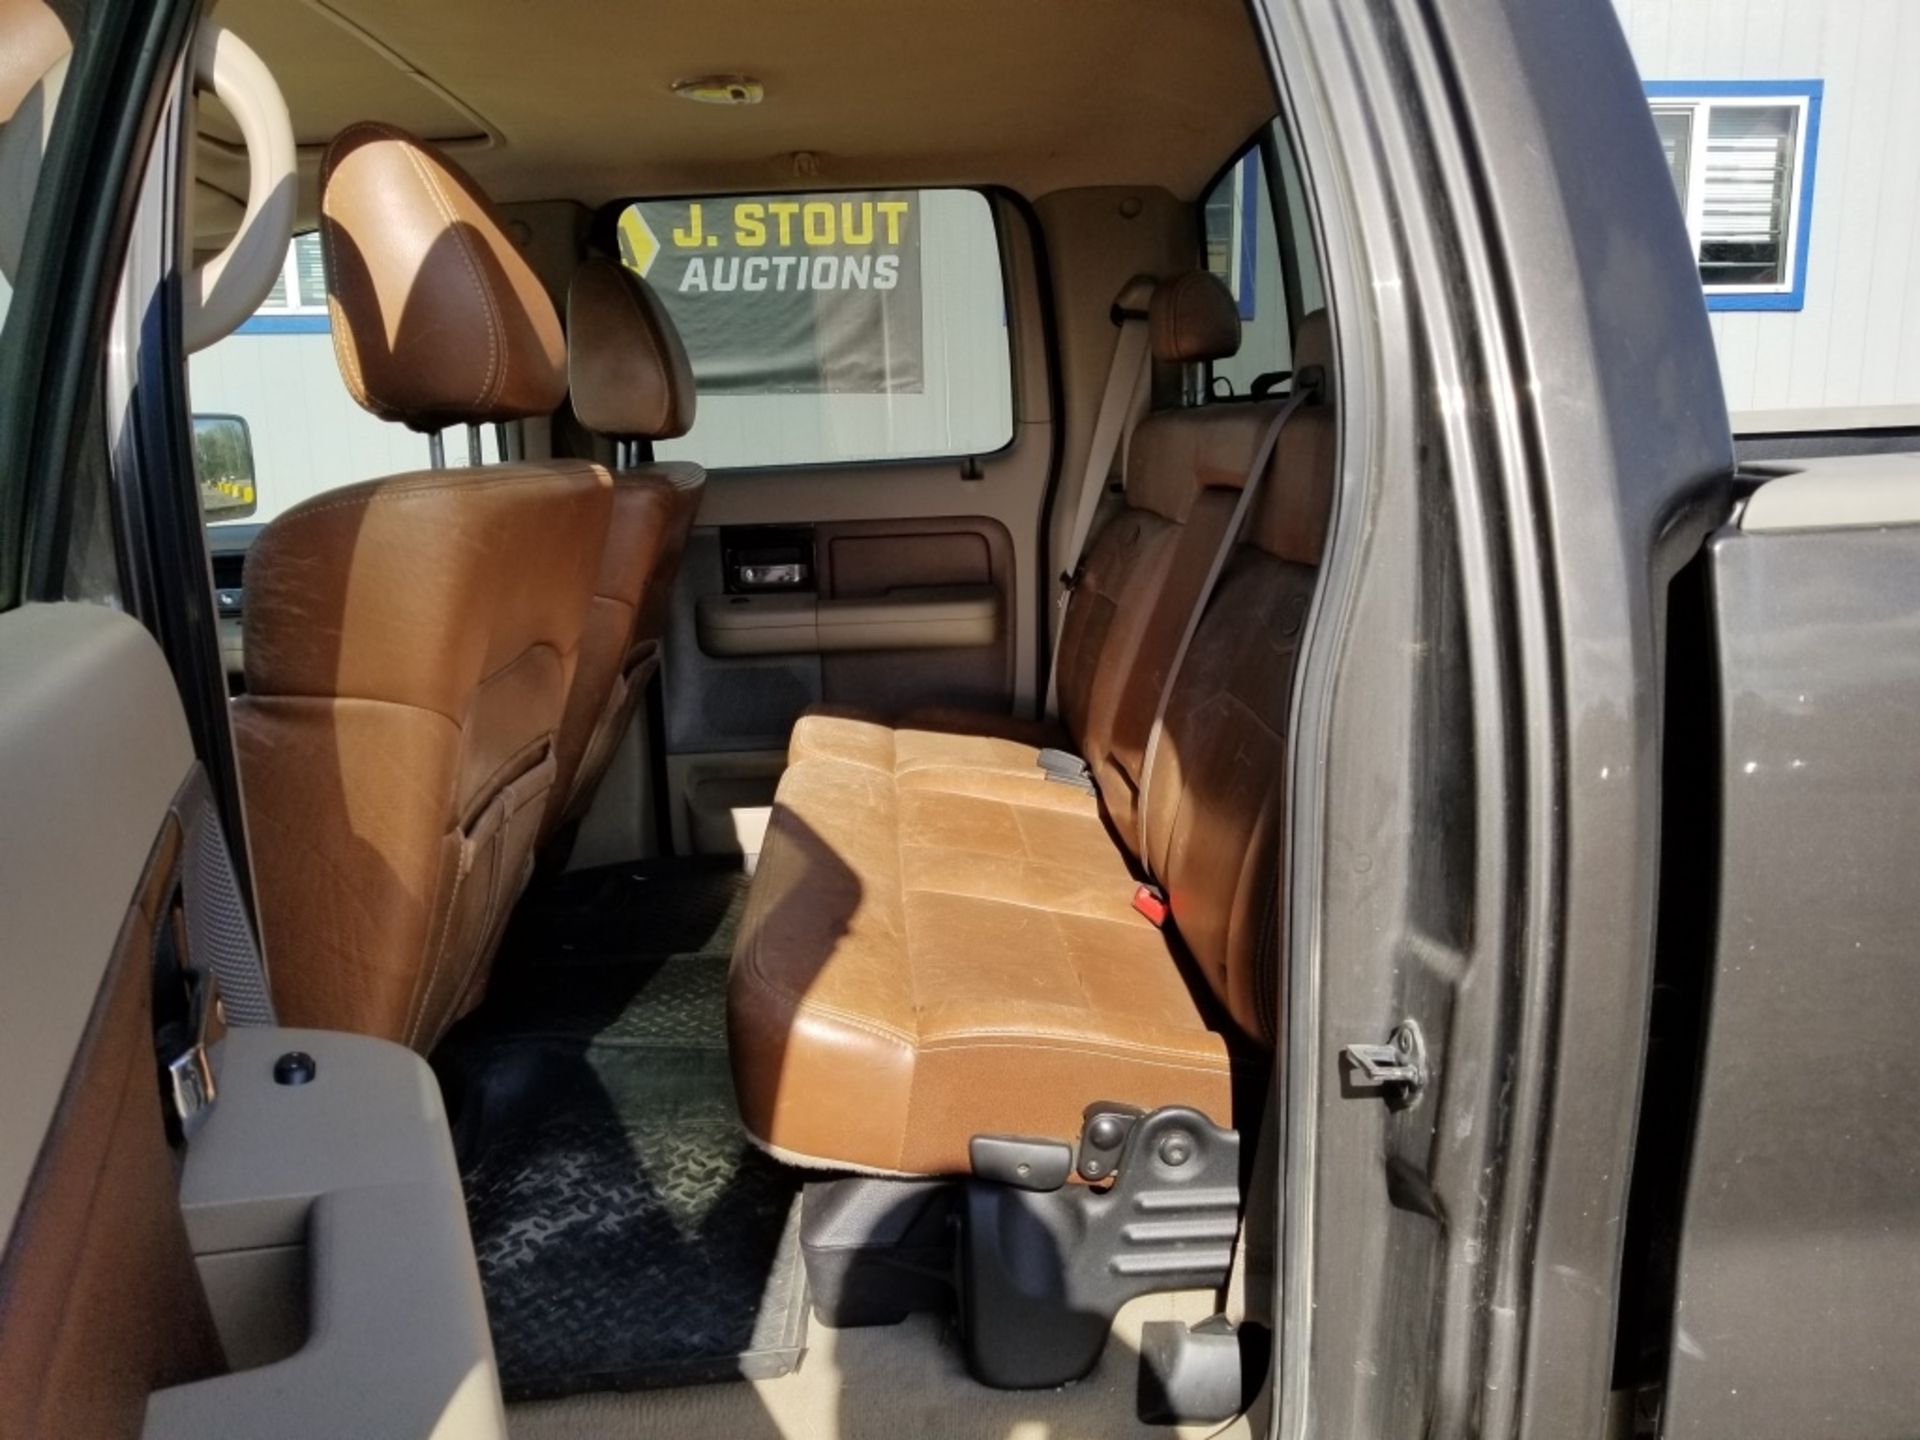 2007 Ford F150 King Ranch 4x4 Extra Cab Pickup - Image 10 of 21